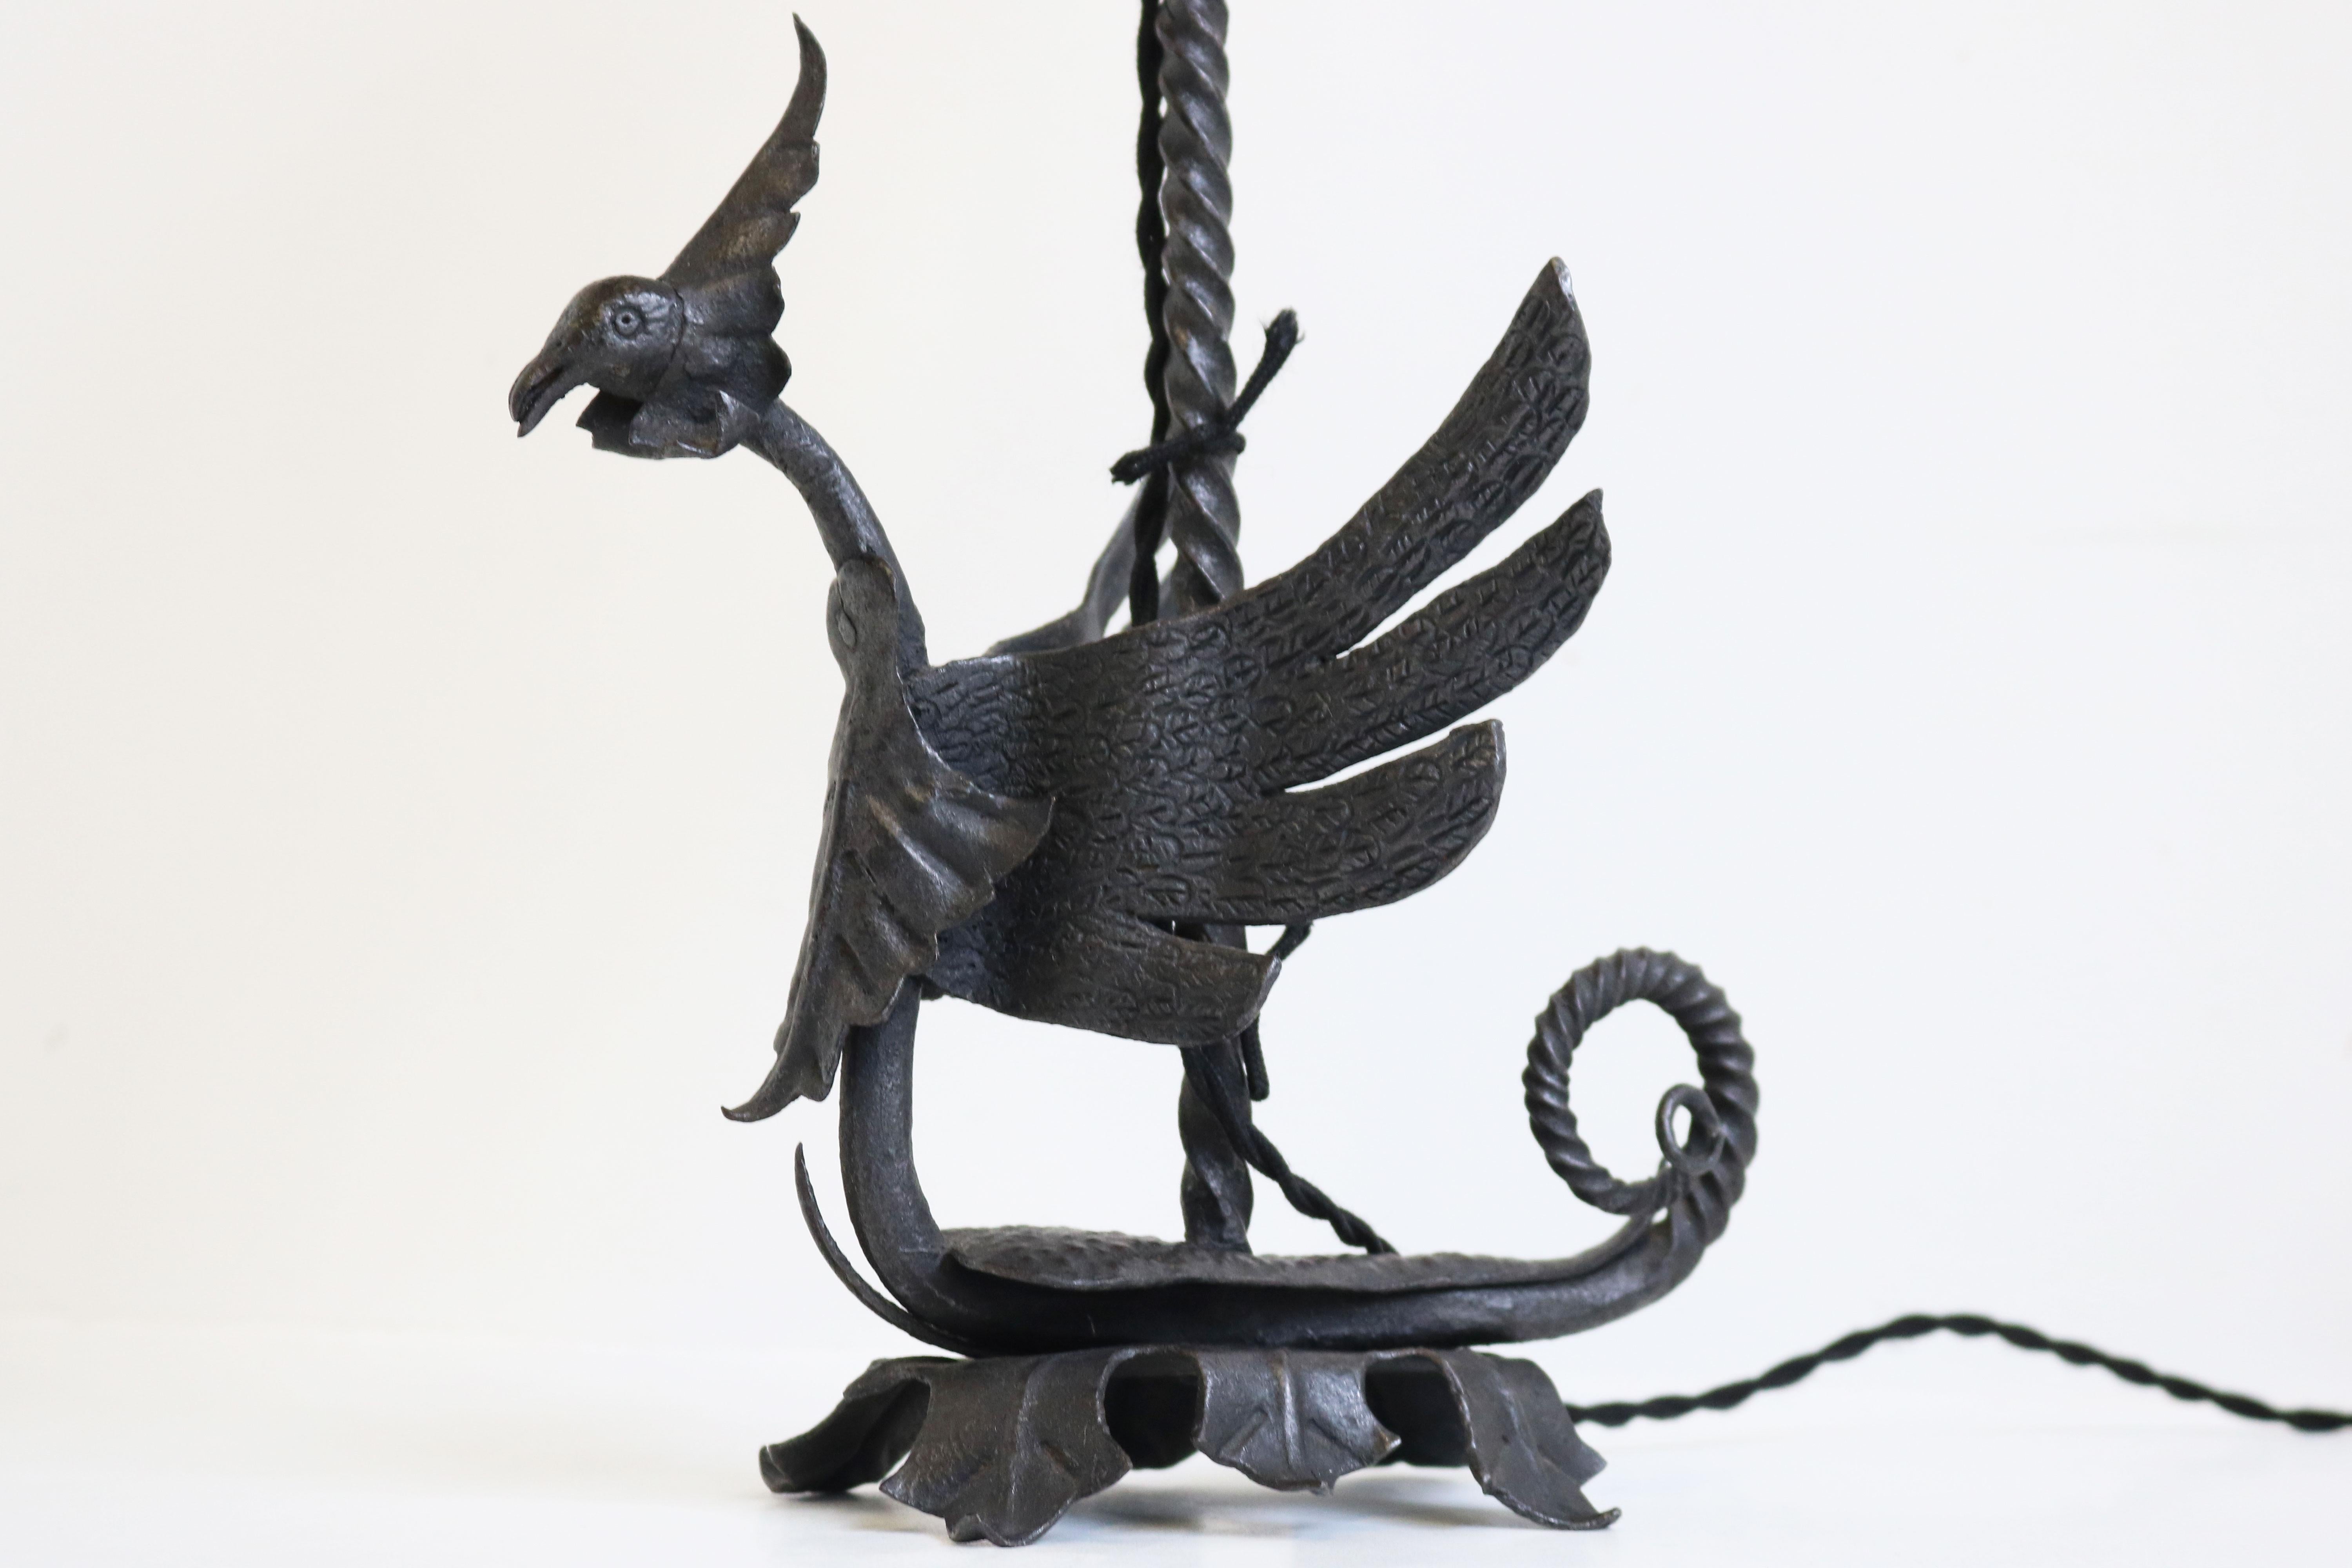 Gorgeous Arts & Crafts style table lamp by Italian black smith Umberto Bellotto made in Venice 1910. 
Amazing detailed Allegorical Dragon in wrought iron fully done by hand. The tail and wing details are marvelous ! 
With a gorgeous well preserved